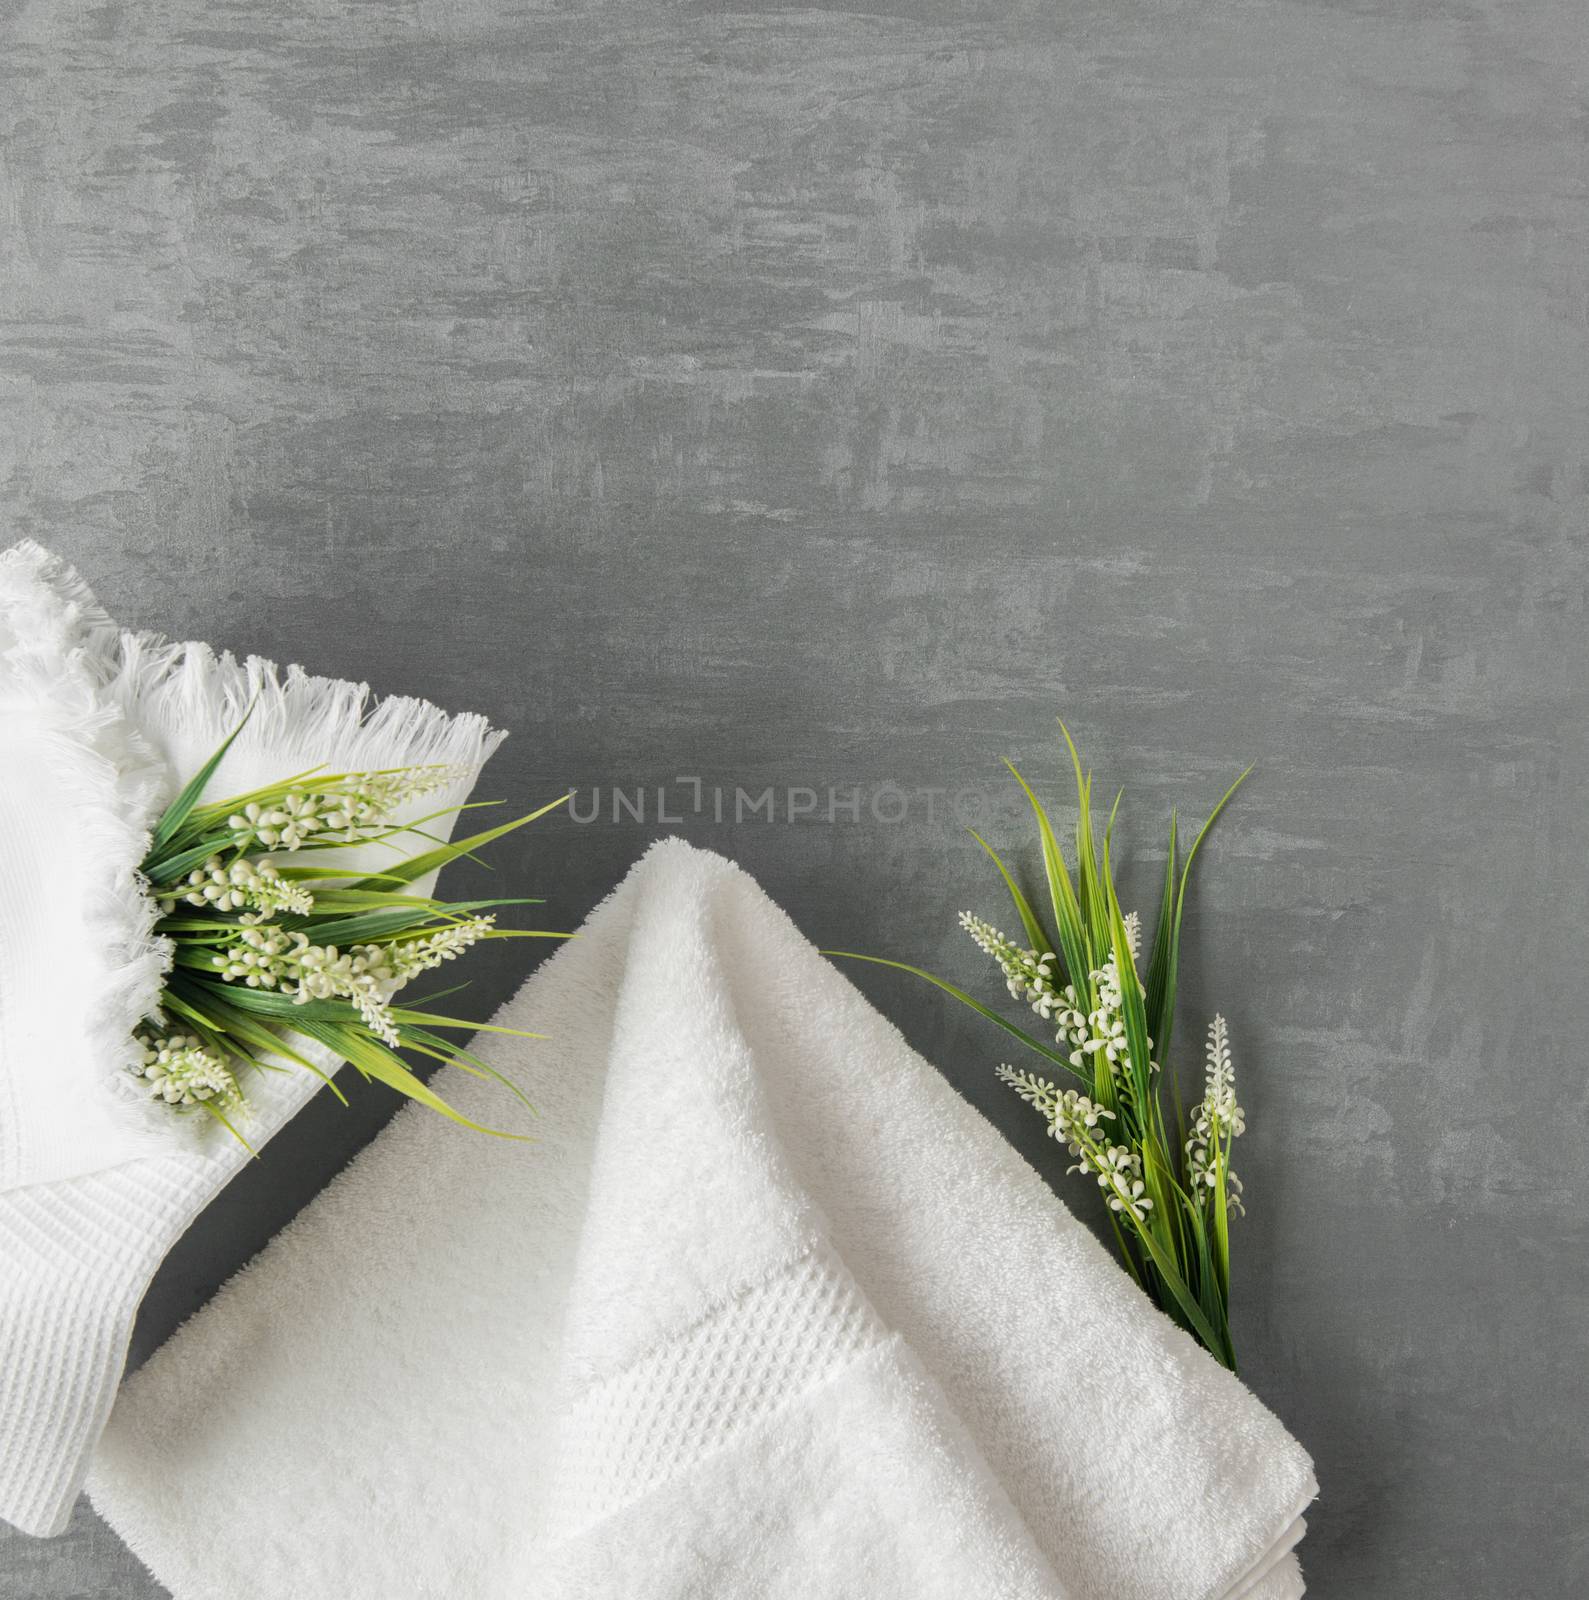 soft towel with a flower in a grey decorative stucco background. top view, isolated